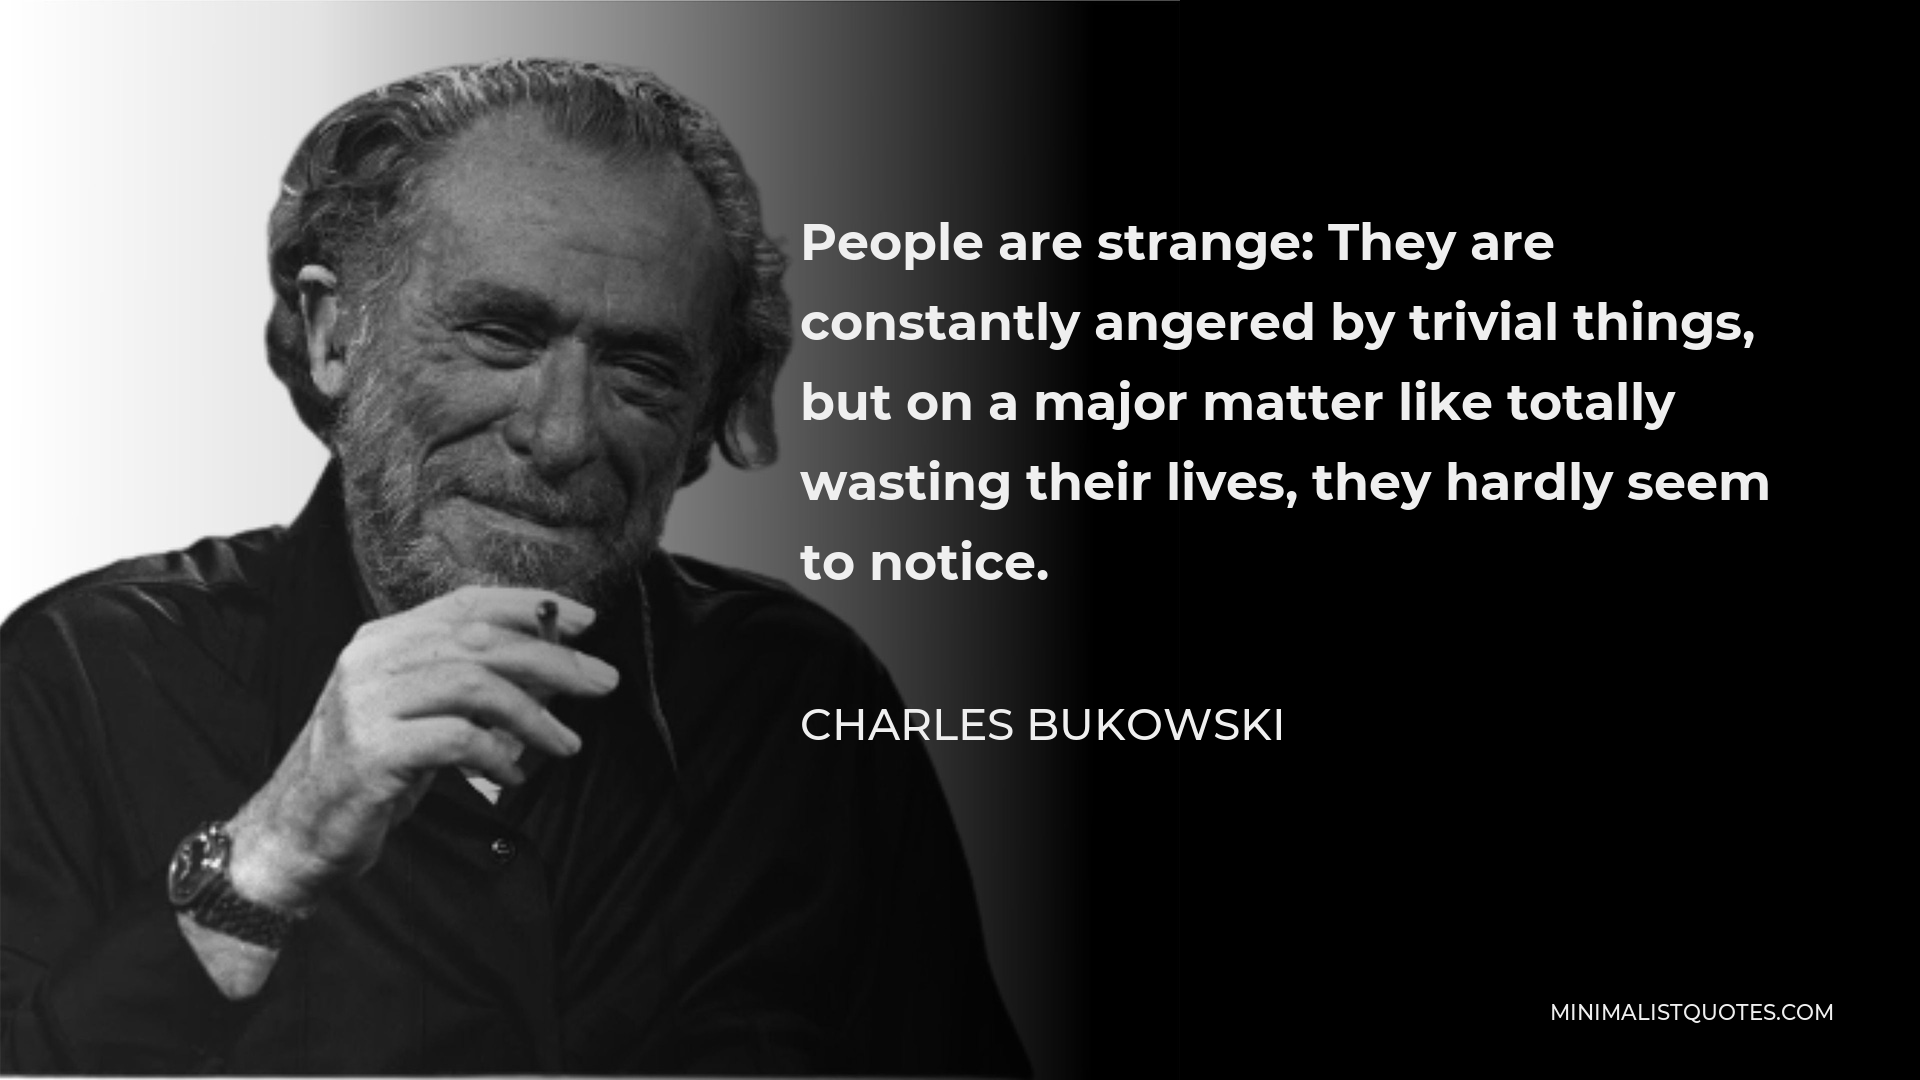 Charles Bukowski Quote - People are strange: They are constantly angered by trivial things, but on a major matter like totally wasting their lives, they hardly seem to notice.